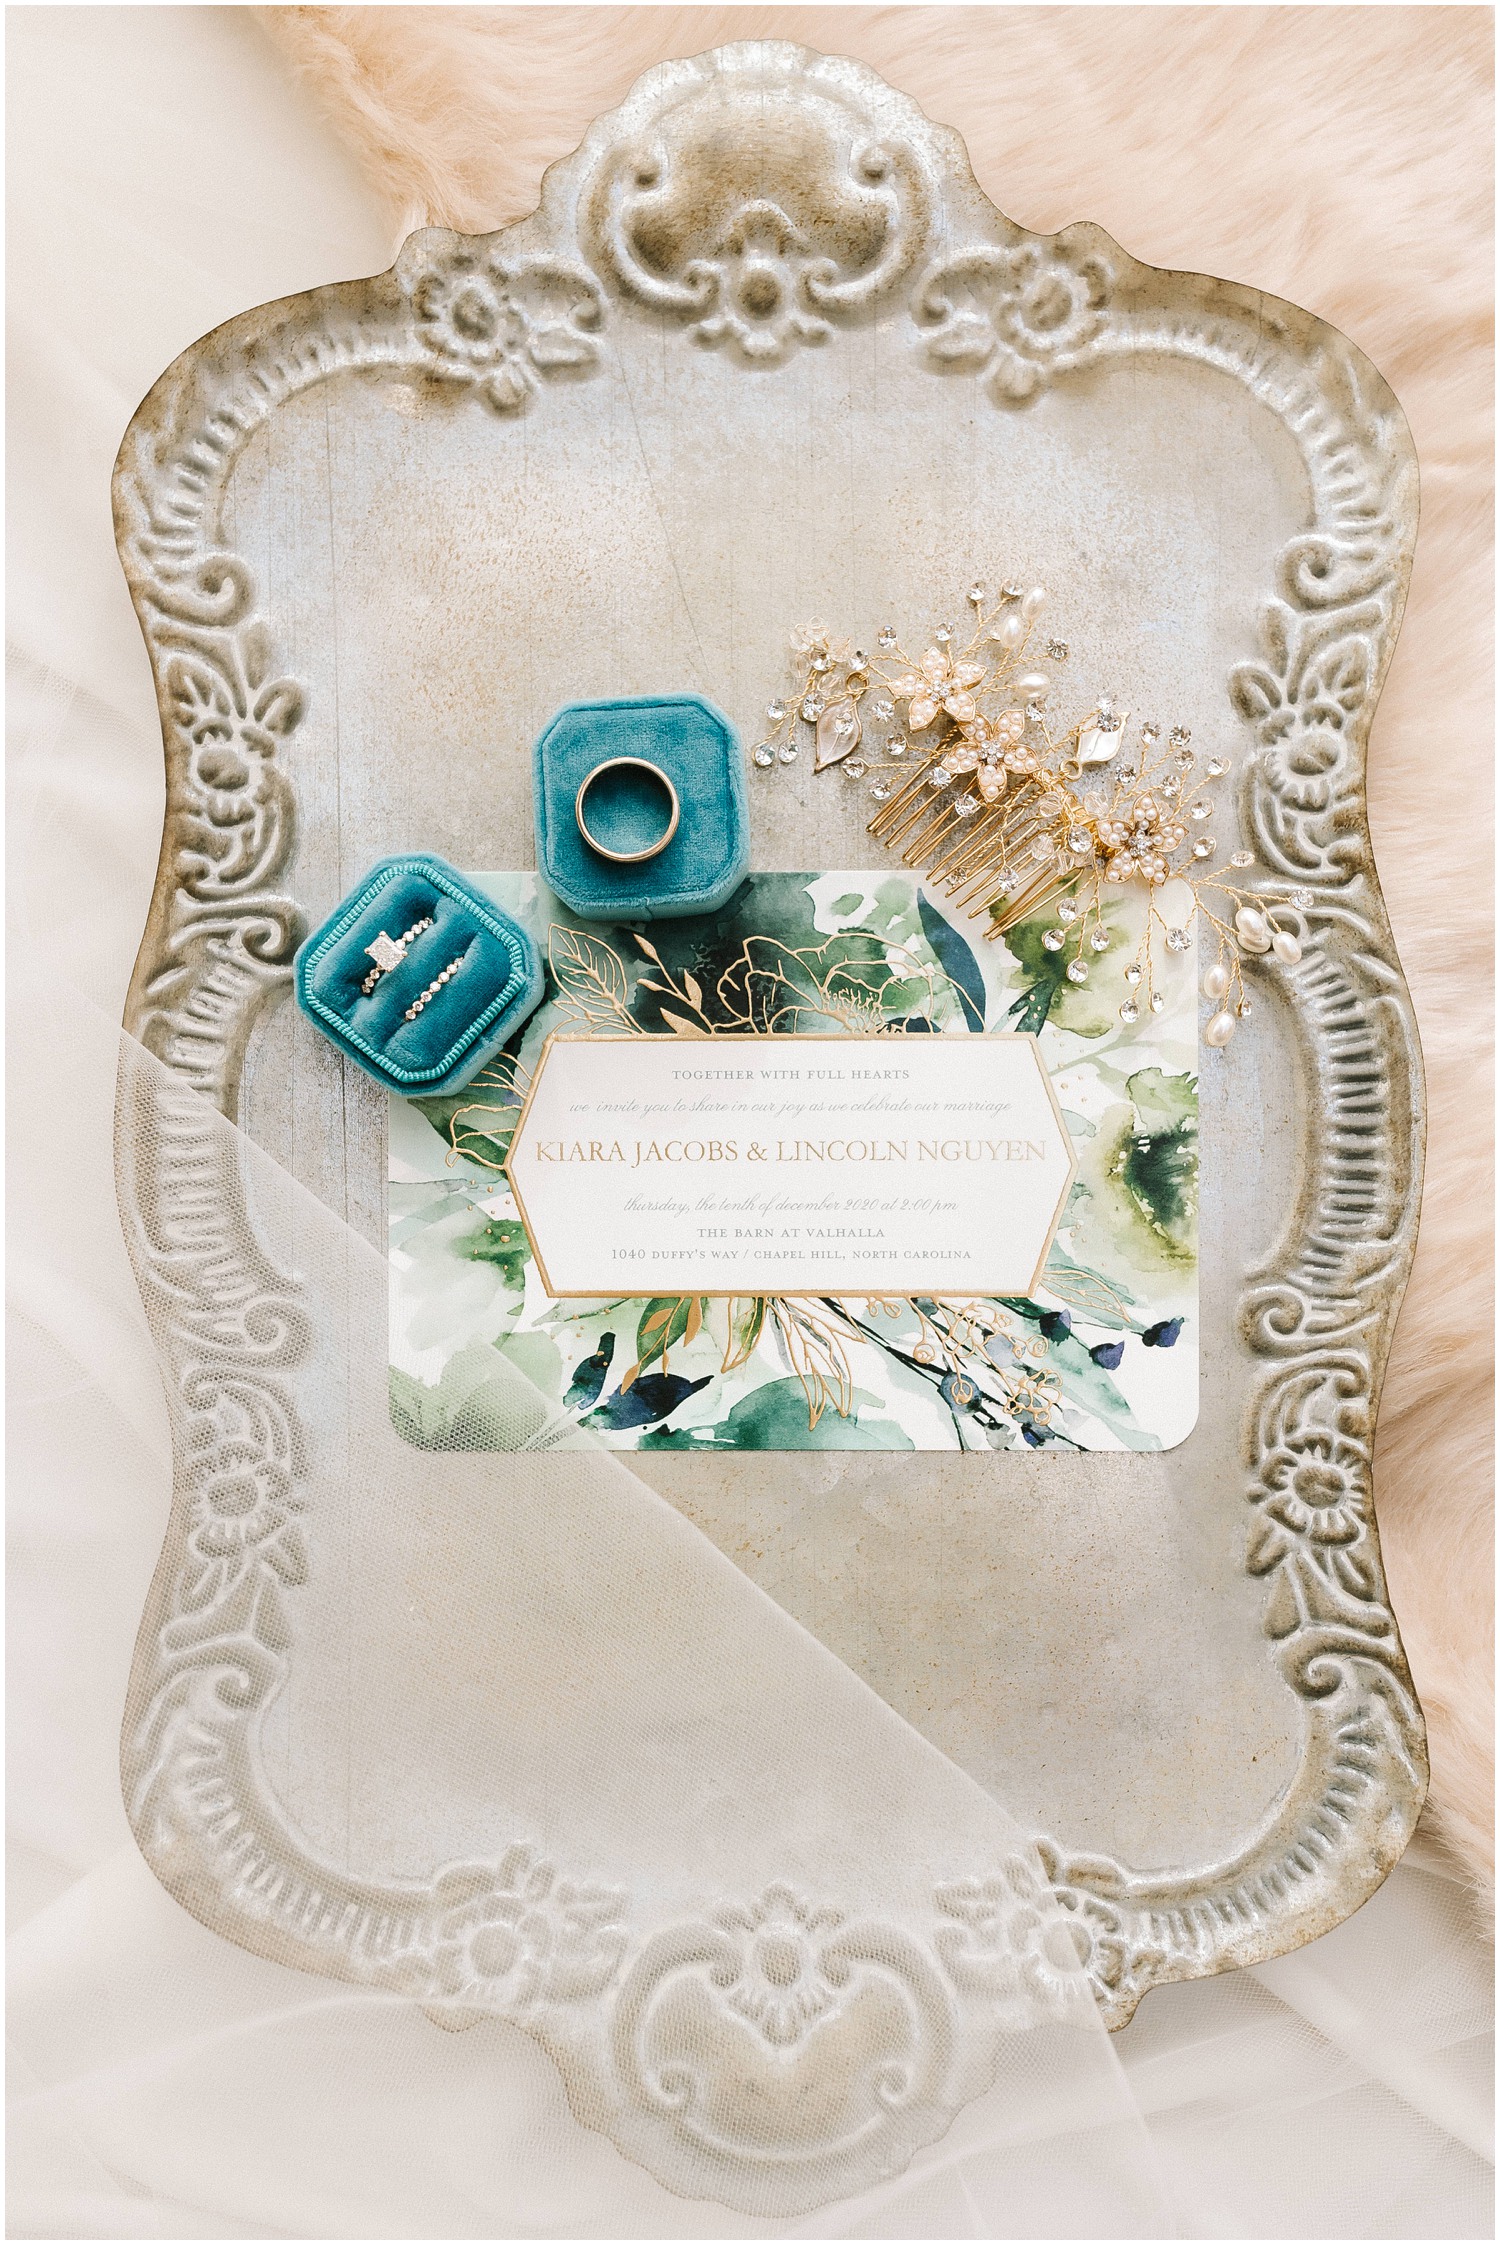 Wedding Details at The Barn at Valhalla in Raleigh, NC by Winston Salem Photographer Chelsea Renay